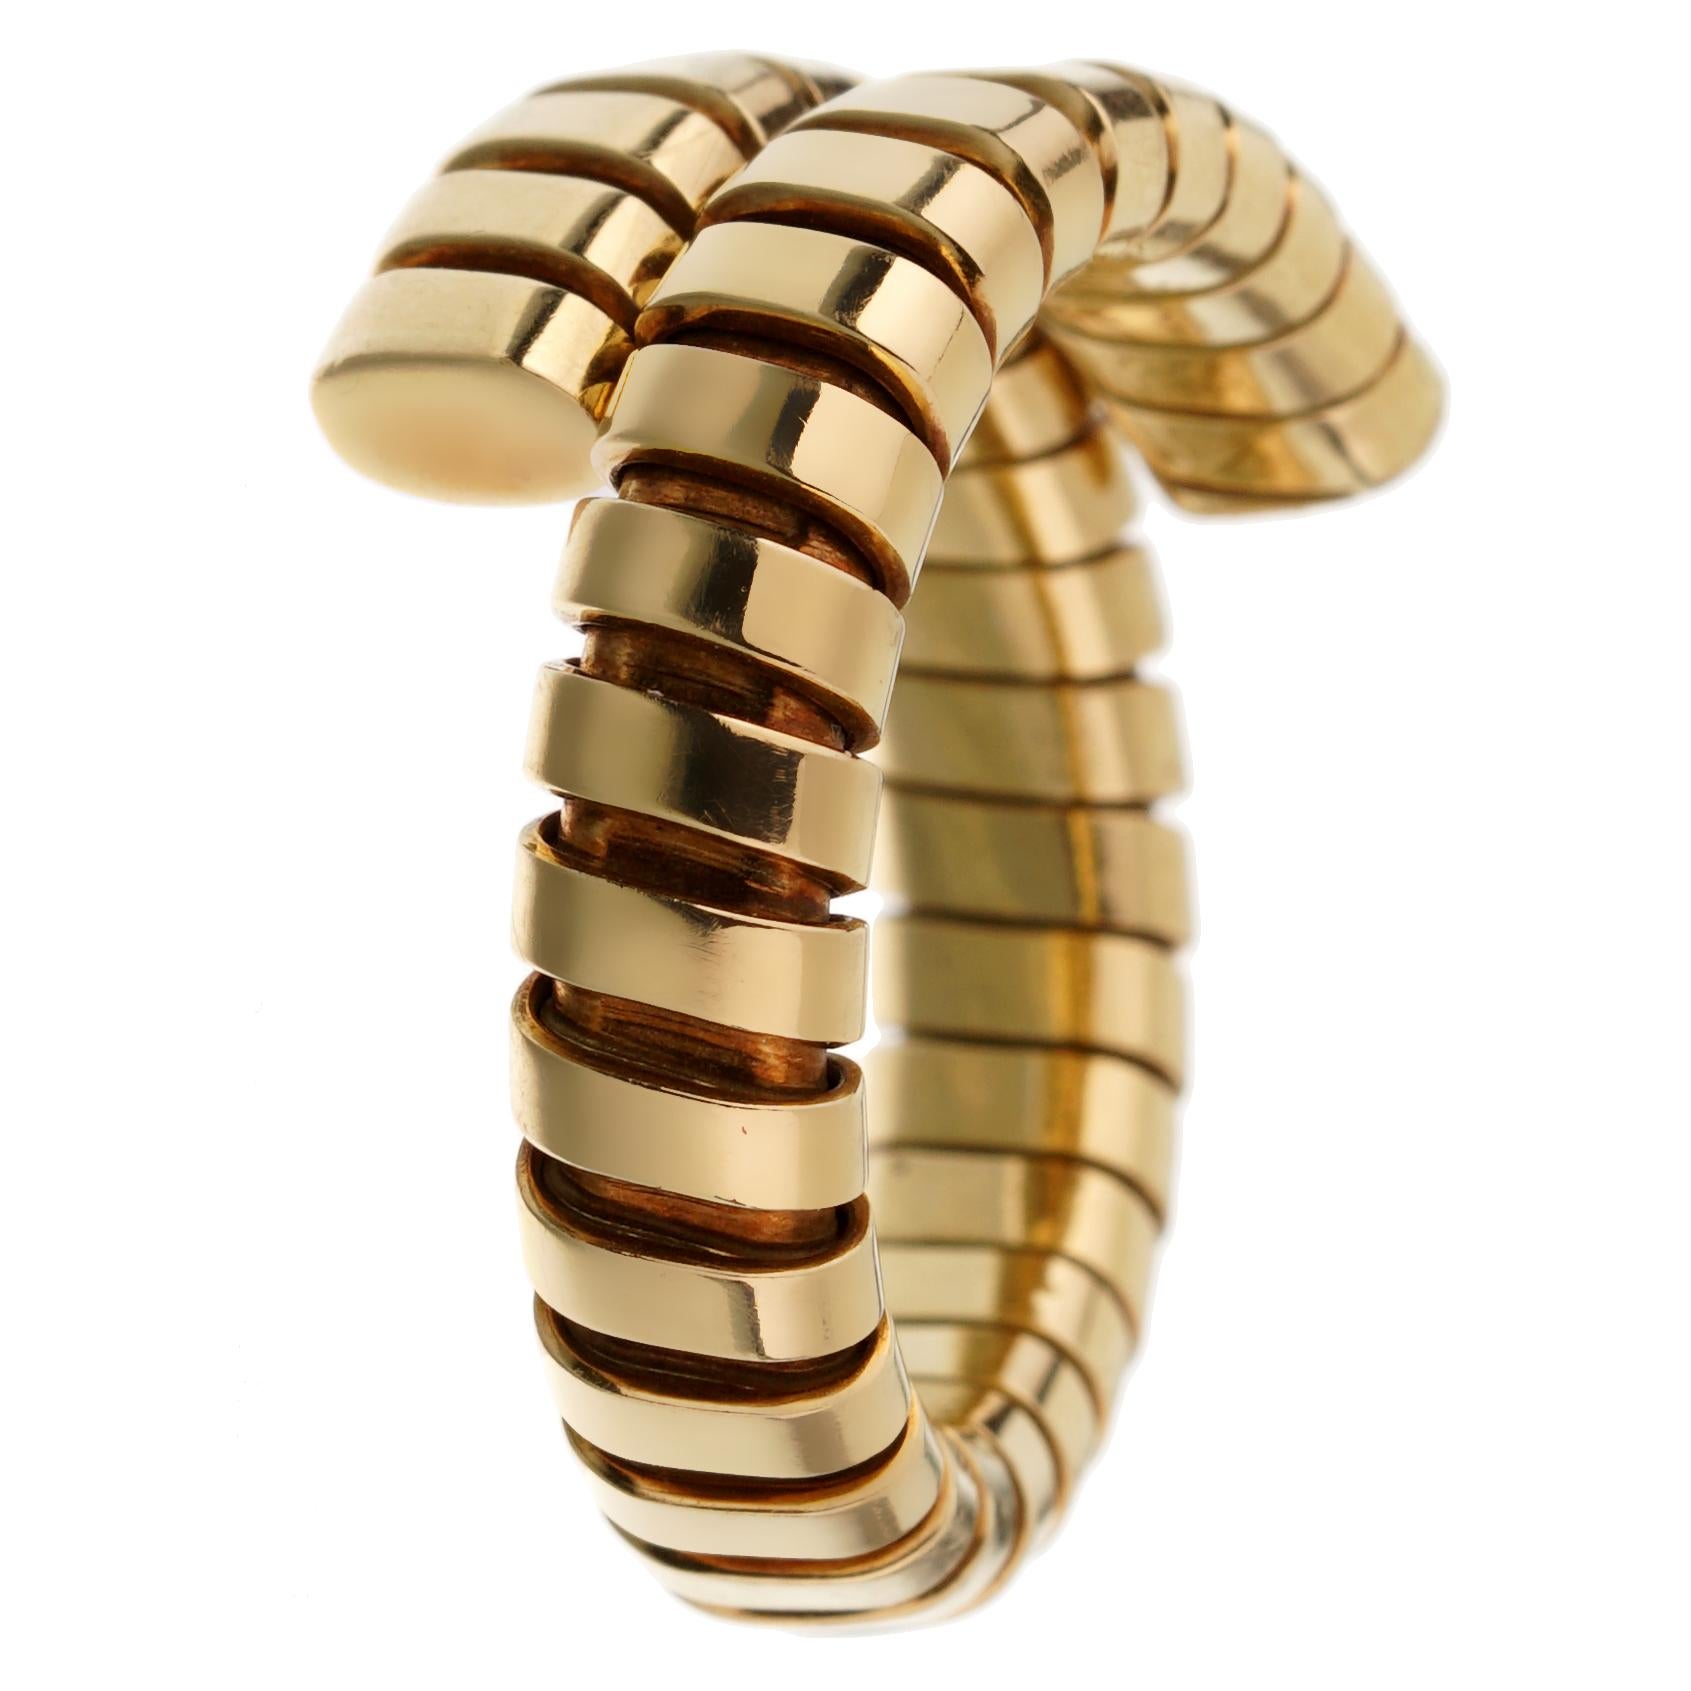 An iconic Bulgari spiga yellow gold flexible ring crafted in 18k yellow gold, the ring measures a size 7 and can be resized.